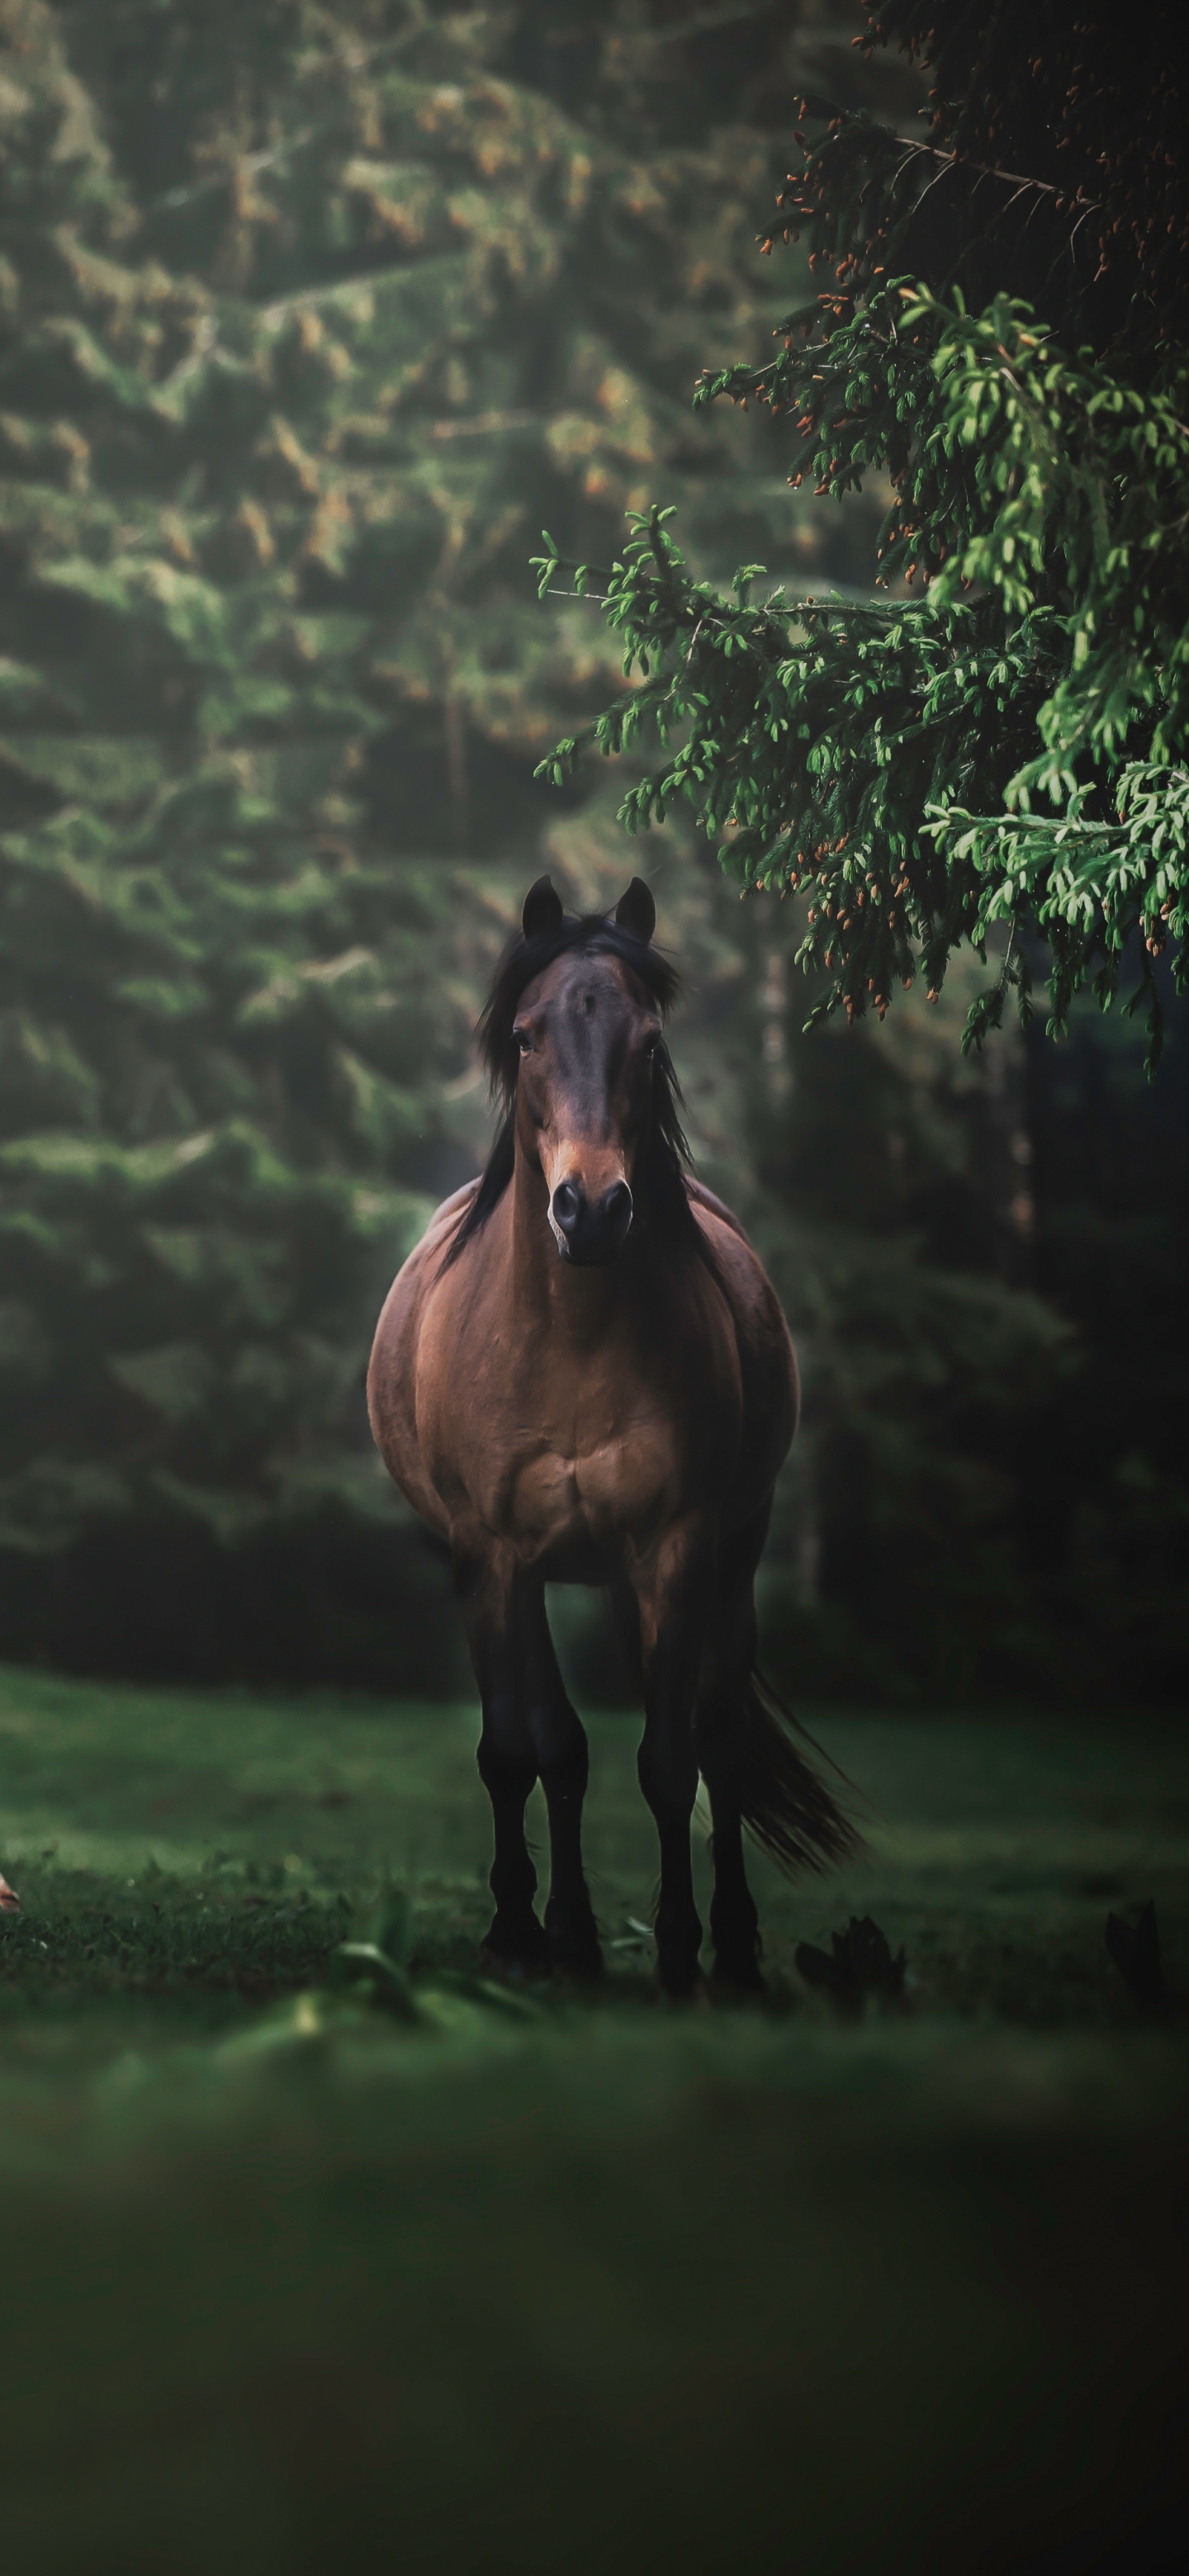 A horse standing in the grass next to trees - Horse